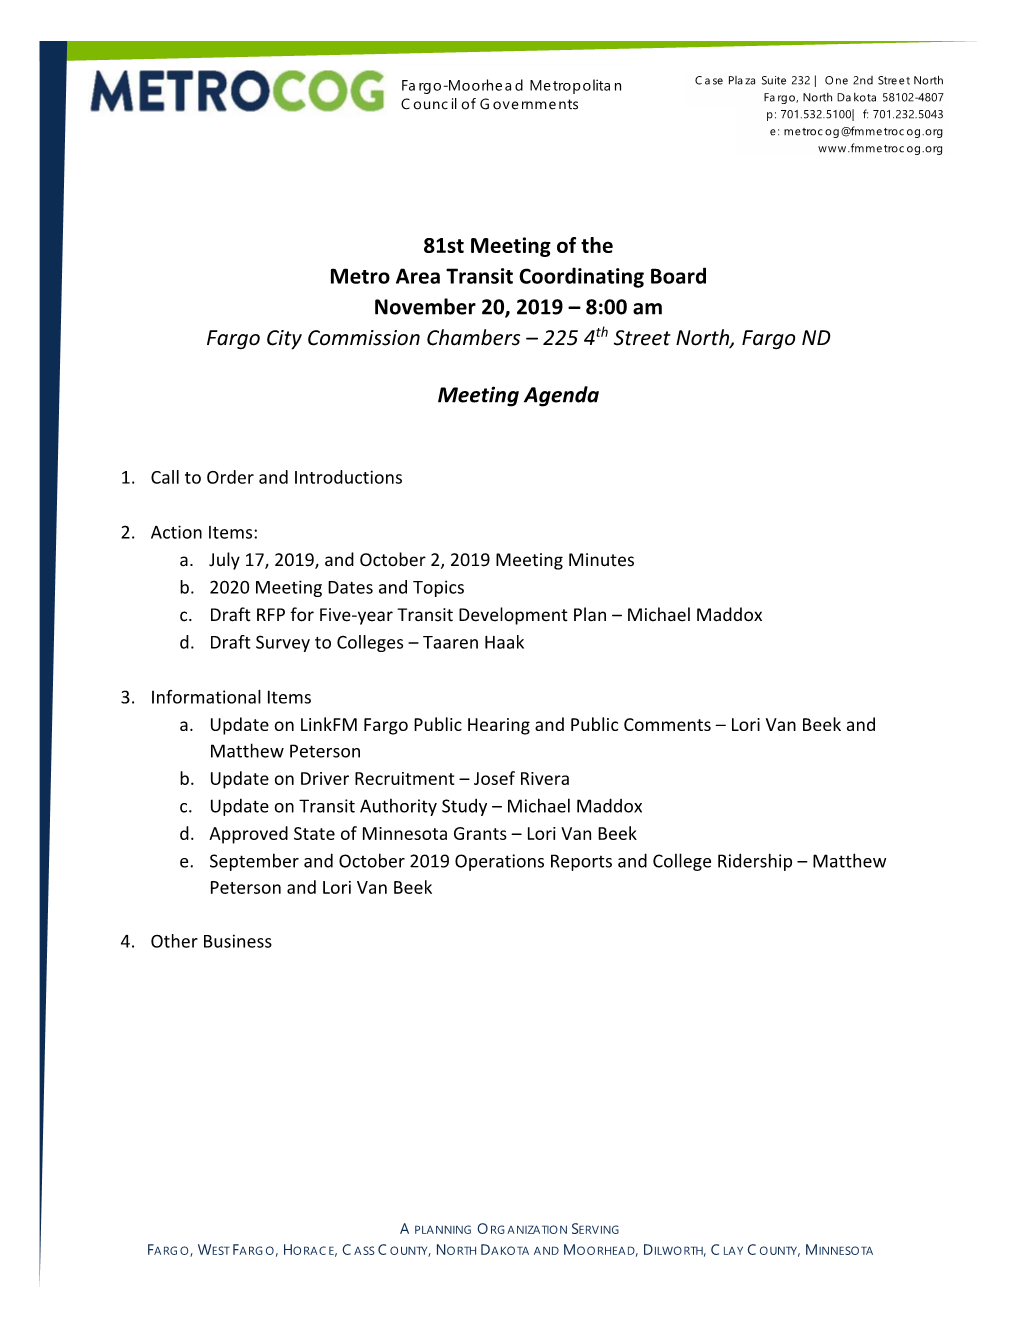 81St Meeting of the Metro Area Transit Coordinating Board November 20, 2019 – 8:00 Am Fargo City Commission Chambers – 225 4Th Street North, Fargo ND